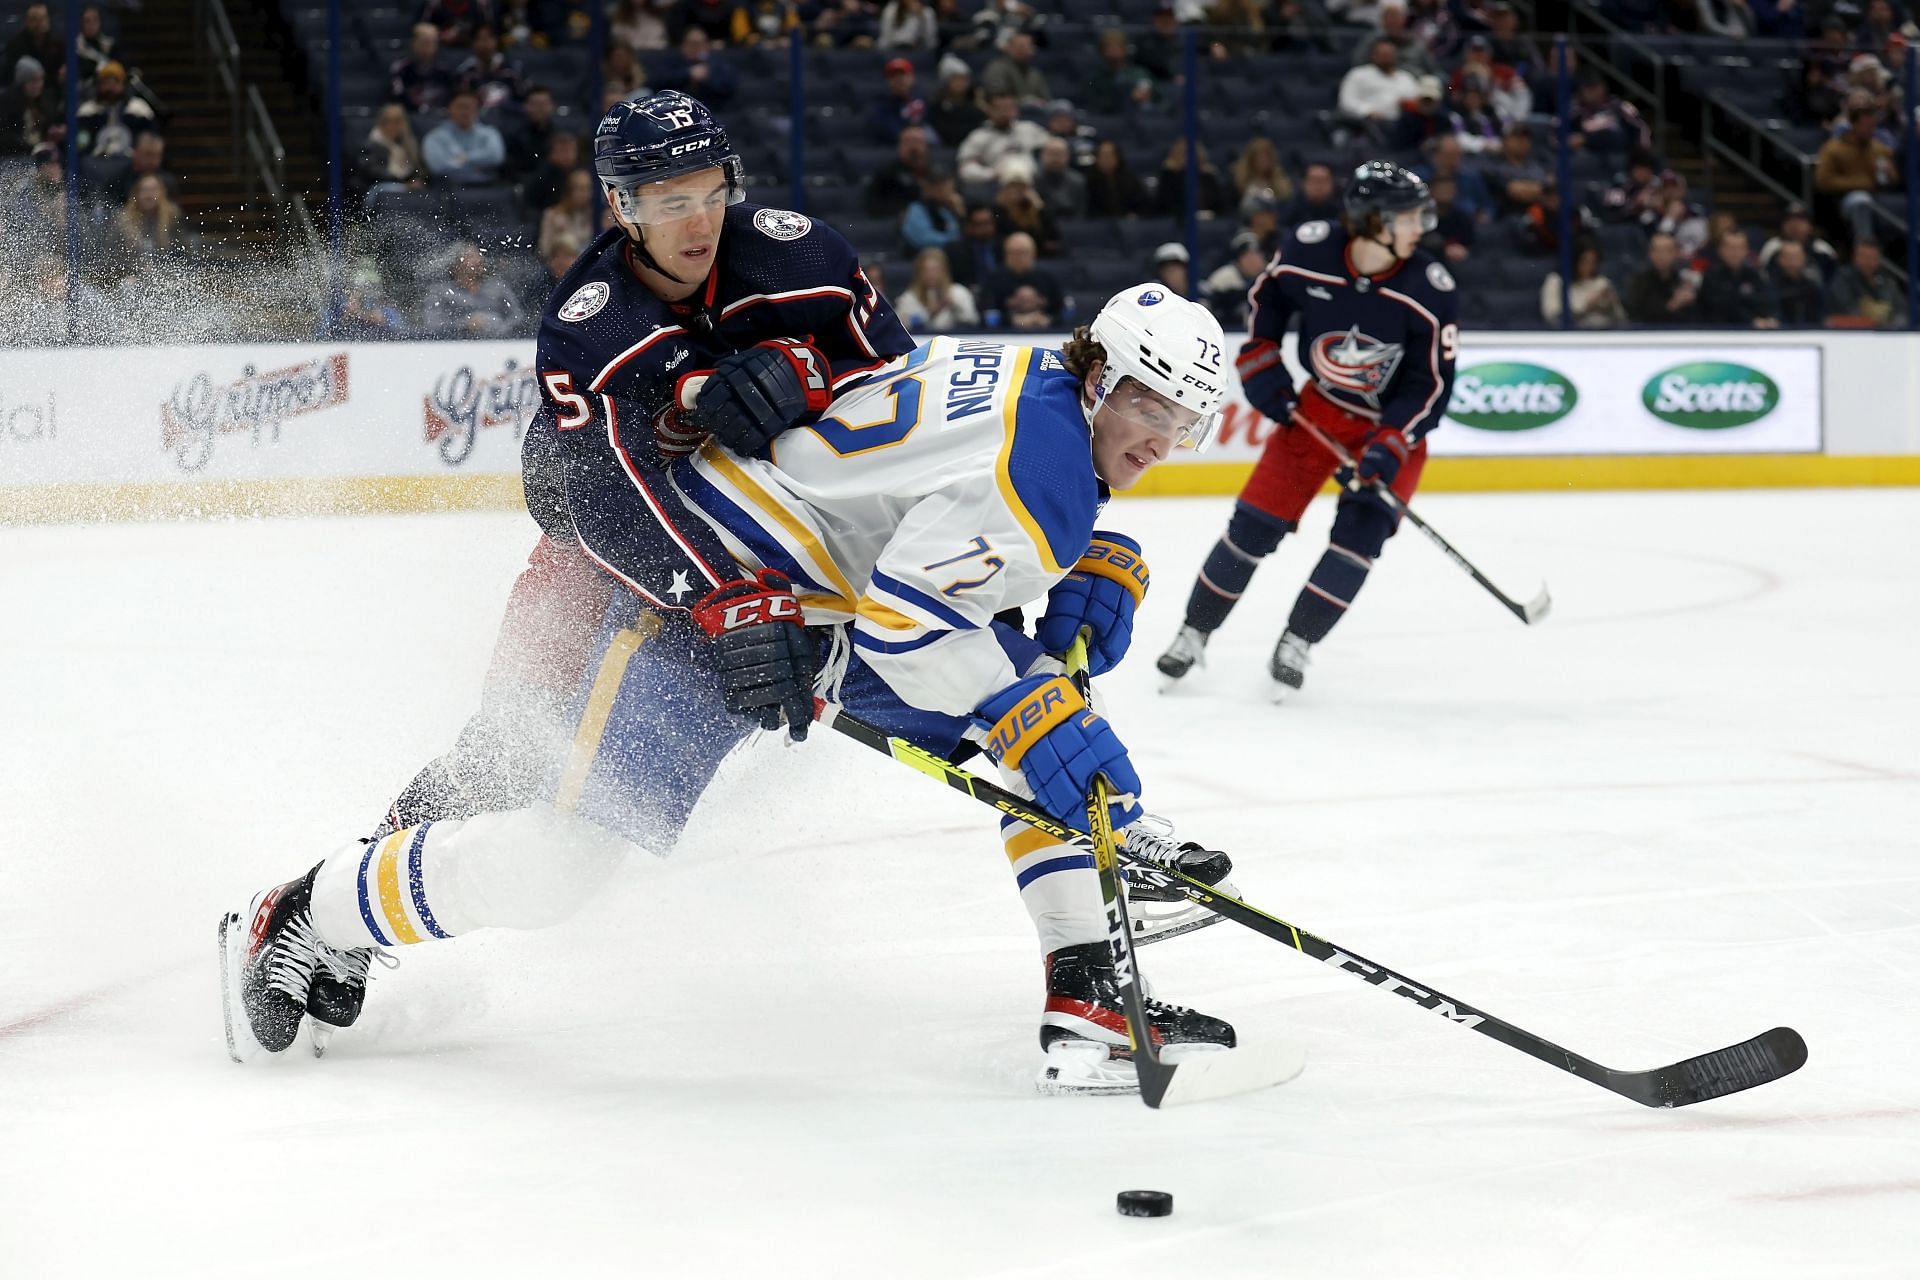 Columbus Blue Jackets vs Buffalo Sabres Live streaming options, how and where to watch NHL live on TV, channel list, and more